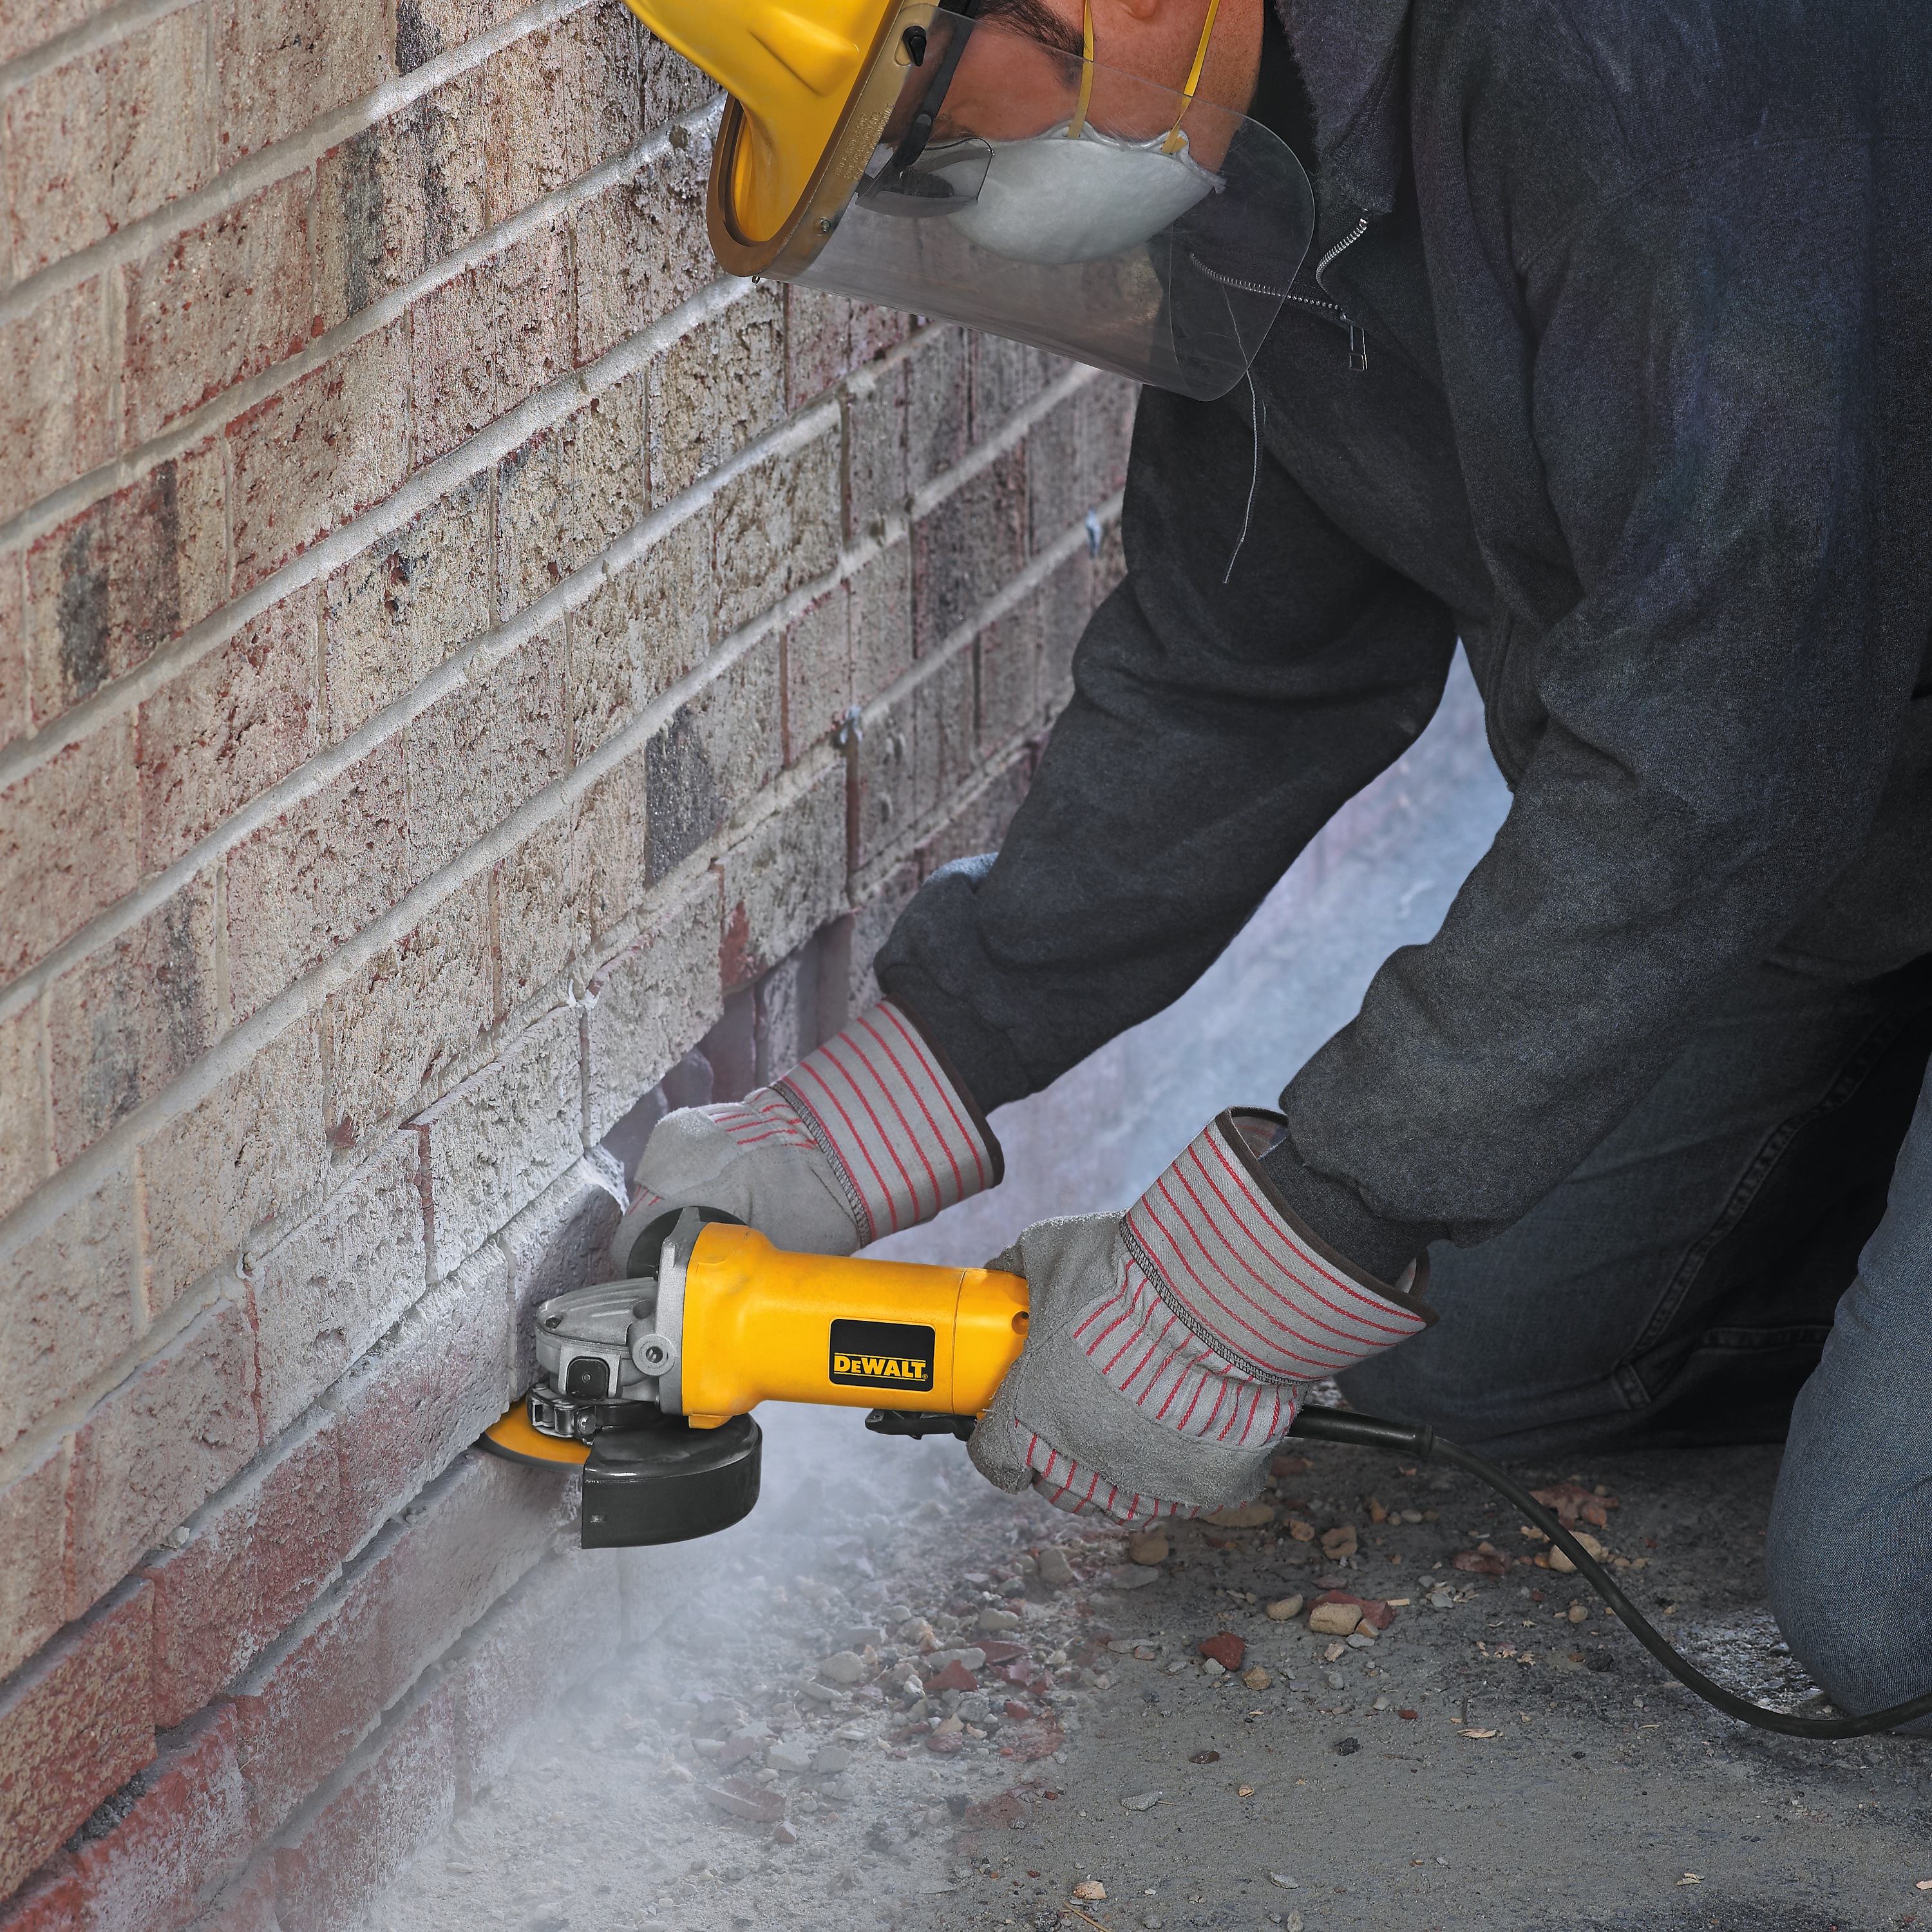 Small Angle Grinder being used on cut a metal pipe